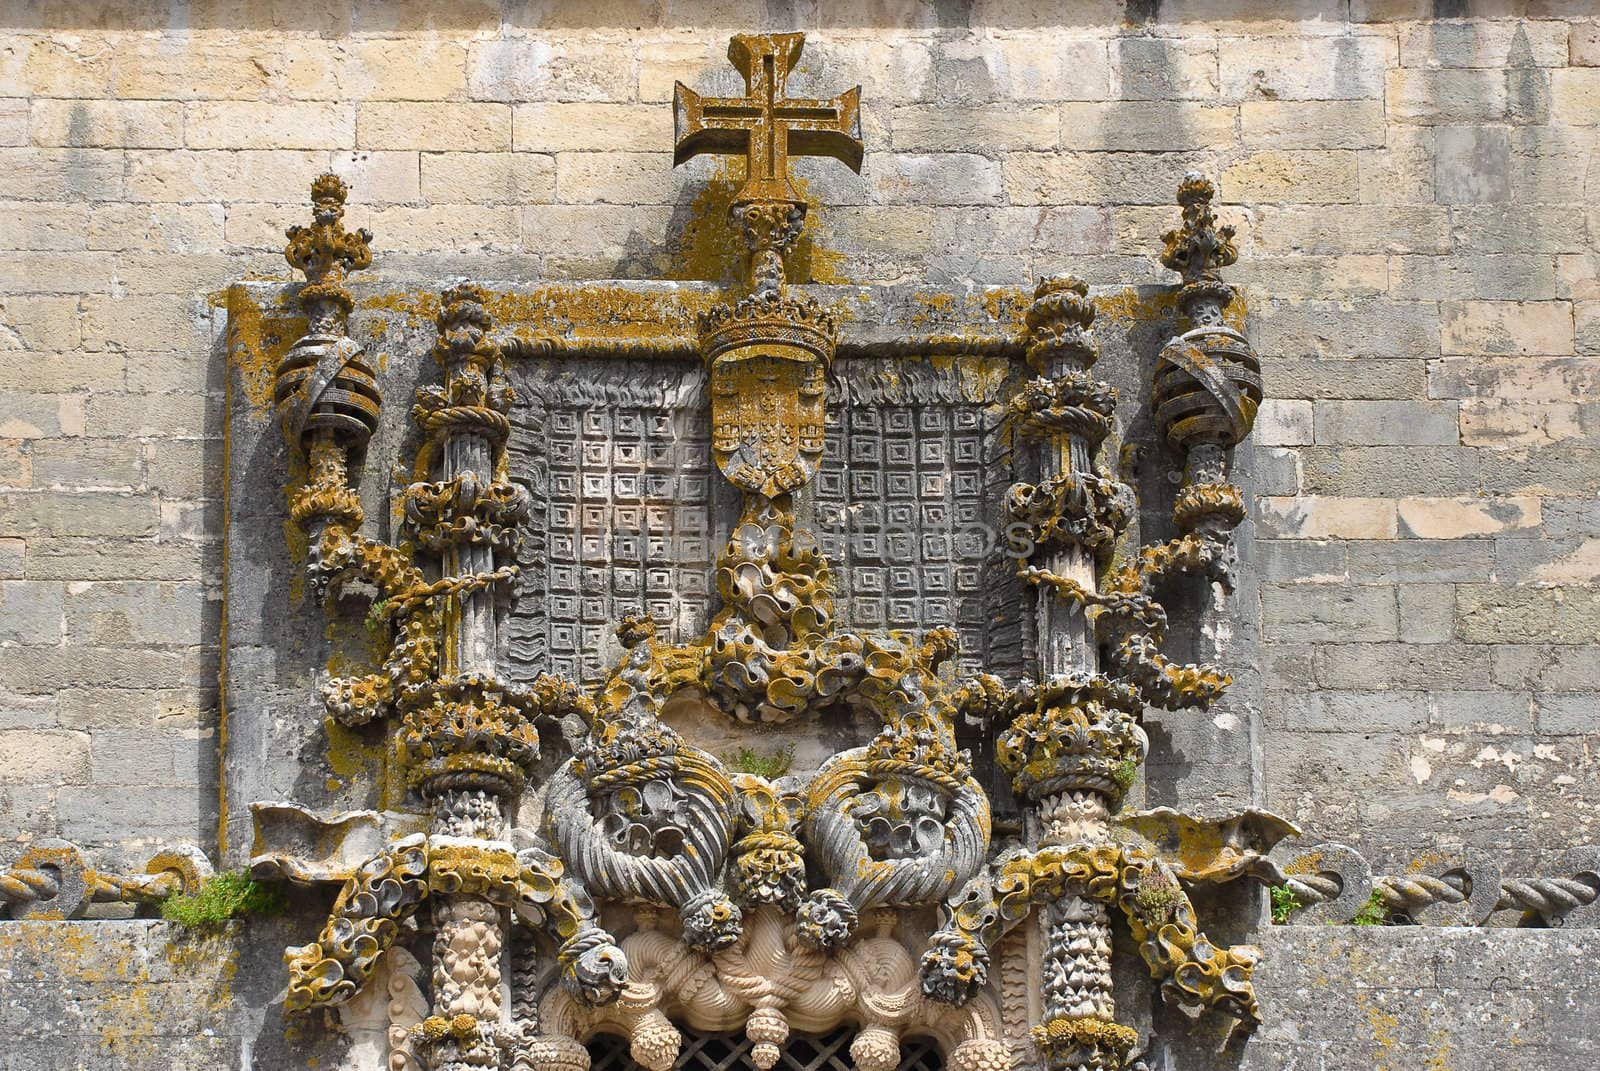 Details of the most famous window in manuelino-style, Christ Convent cloister, Tomar, Portugal.